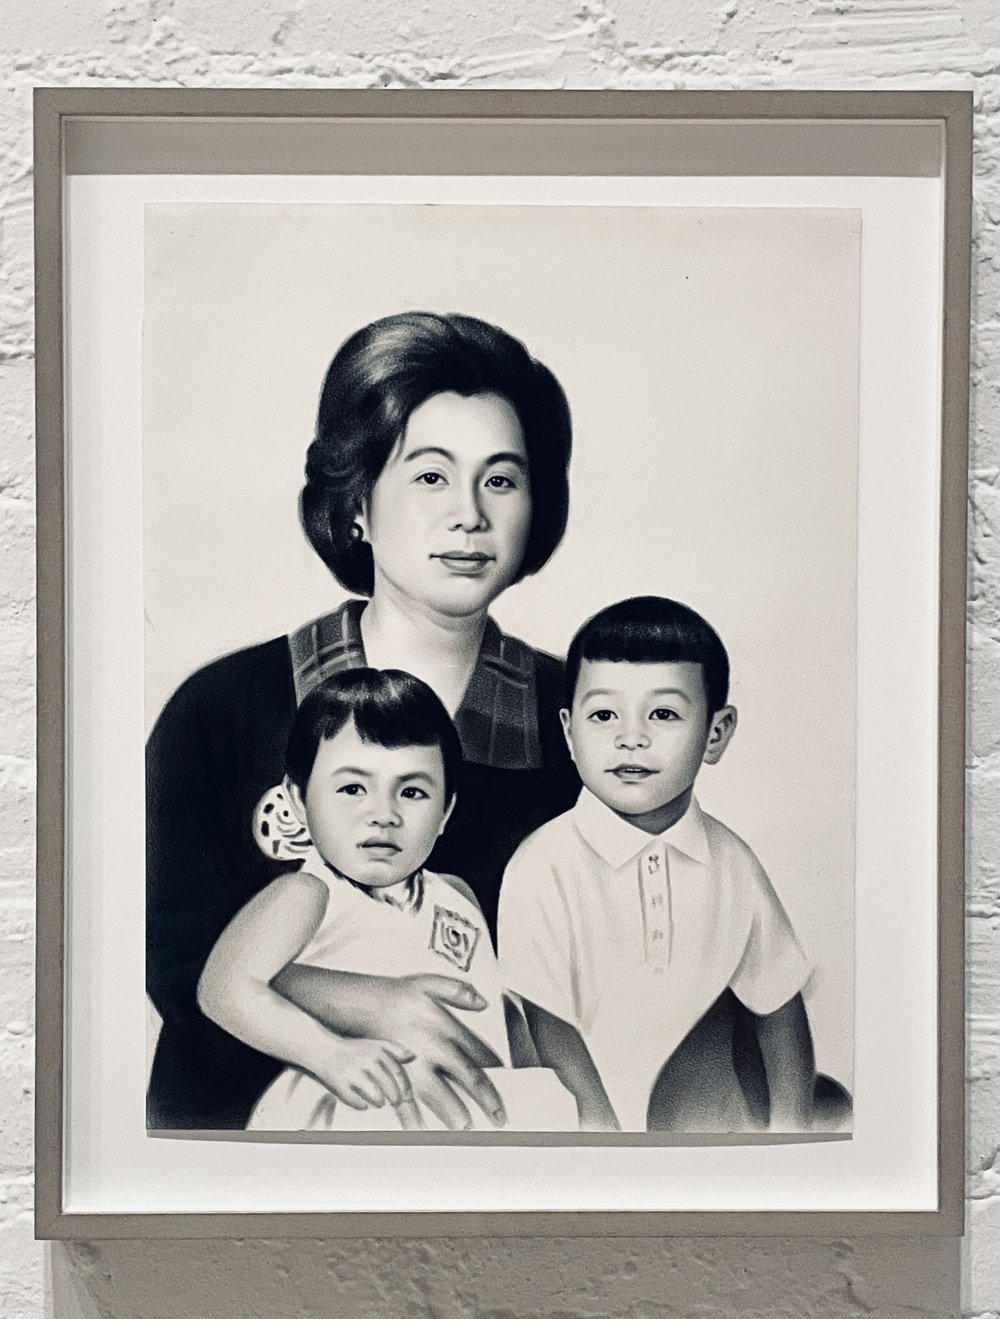 Untitled 1987, Rirkrit Tiravanija (portrait with mother and sister) appropriated work (Copy)